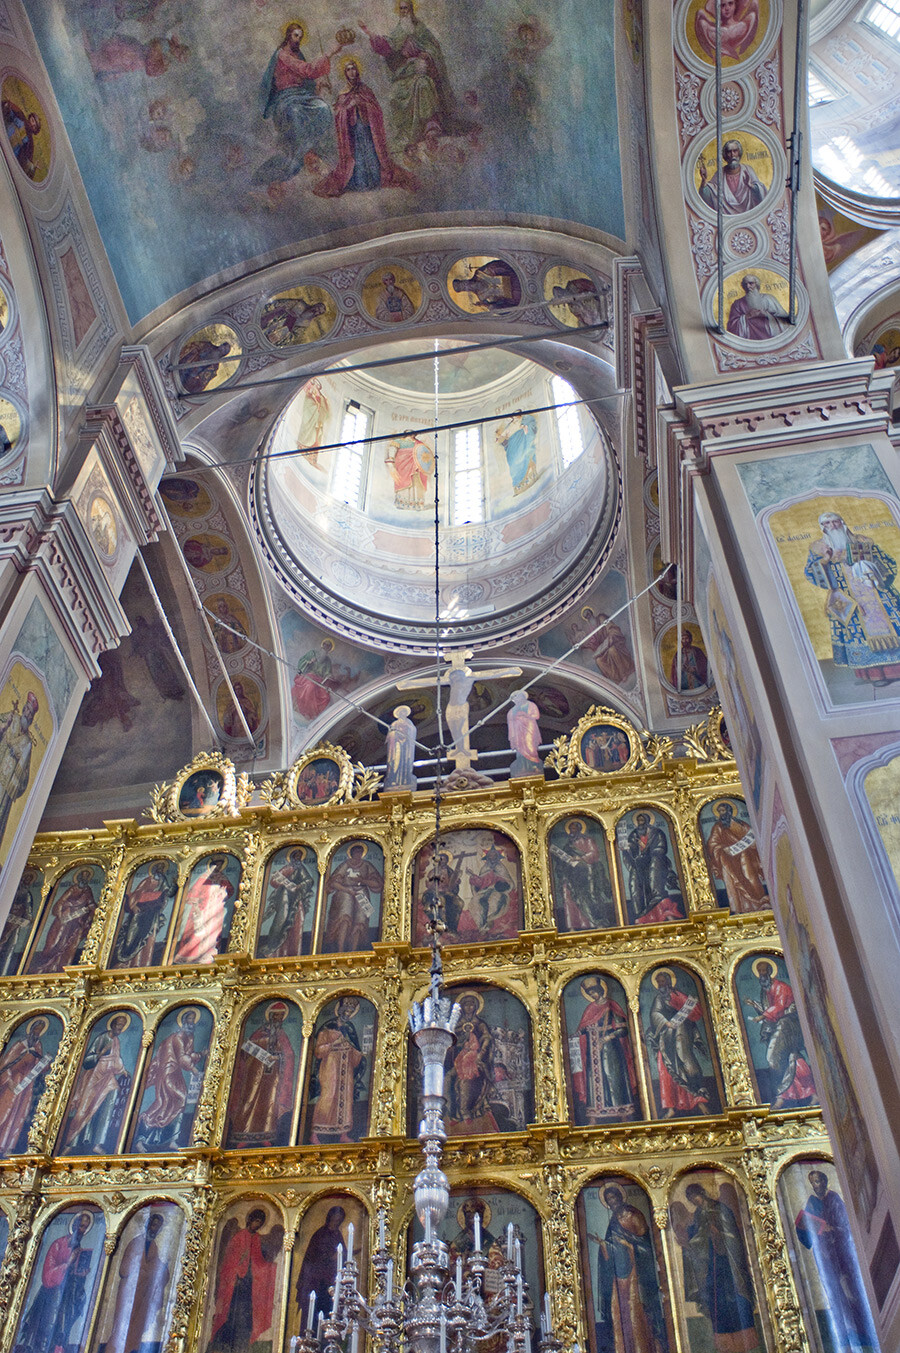 Dormition Cathedral, interior. East view toward icon screen & central dome. 19th-century fresco of Coronation of the Virgin. July 18, 2015